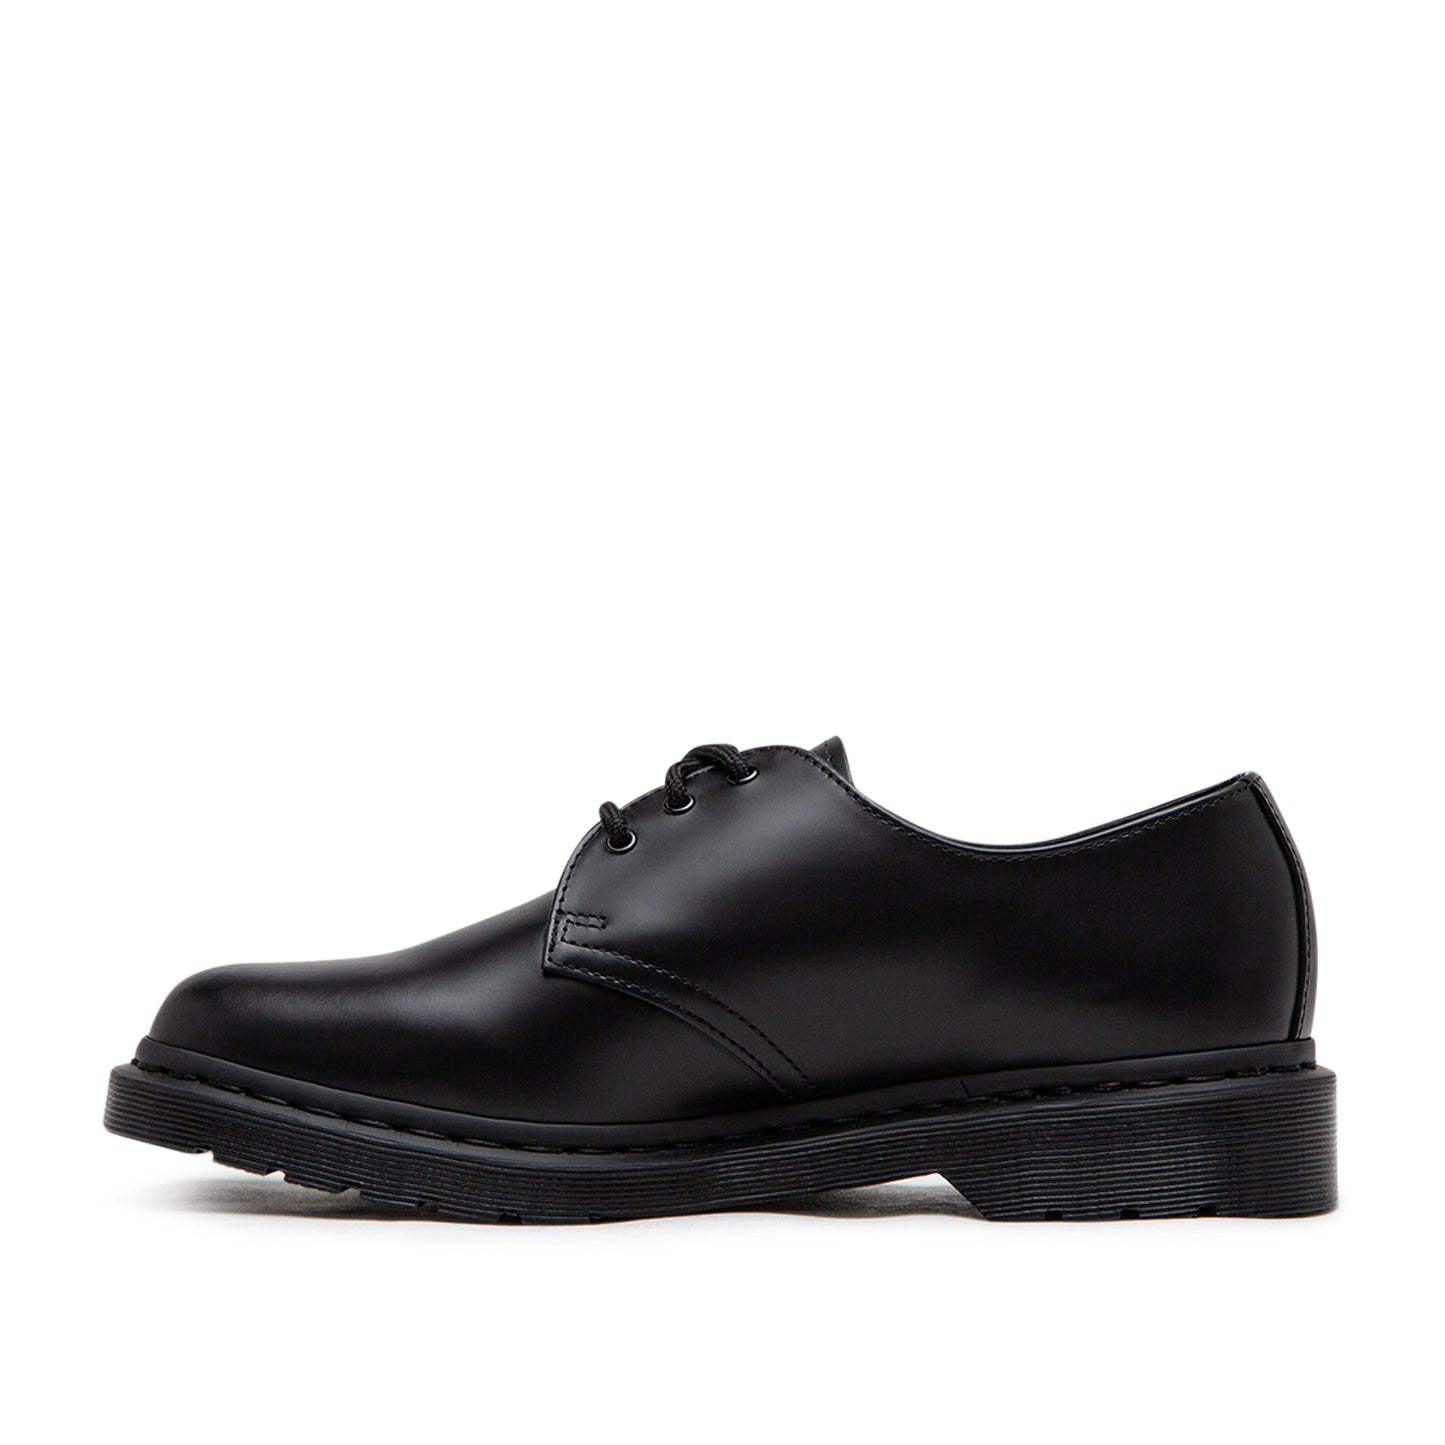 Dr. Martens 1461 Mono Smooth Leather Oxford Shoes (Schwarz)  - Allike Store